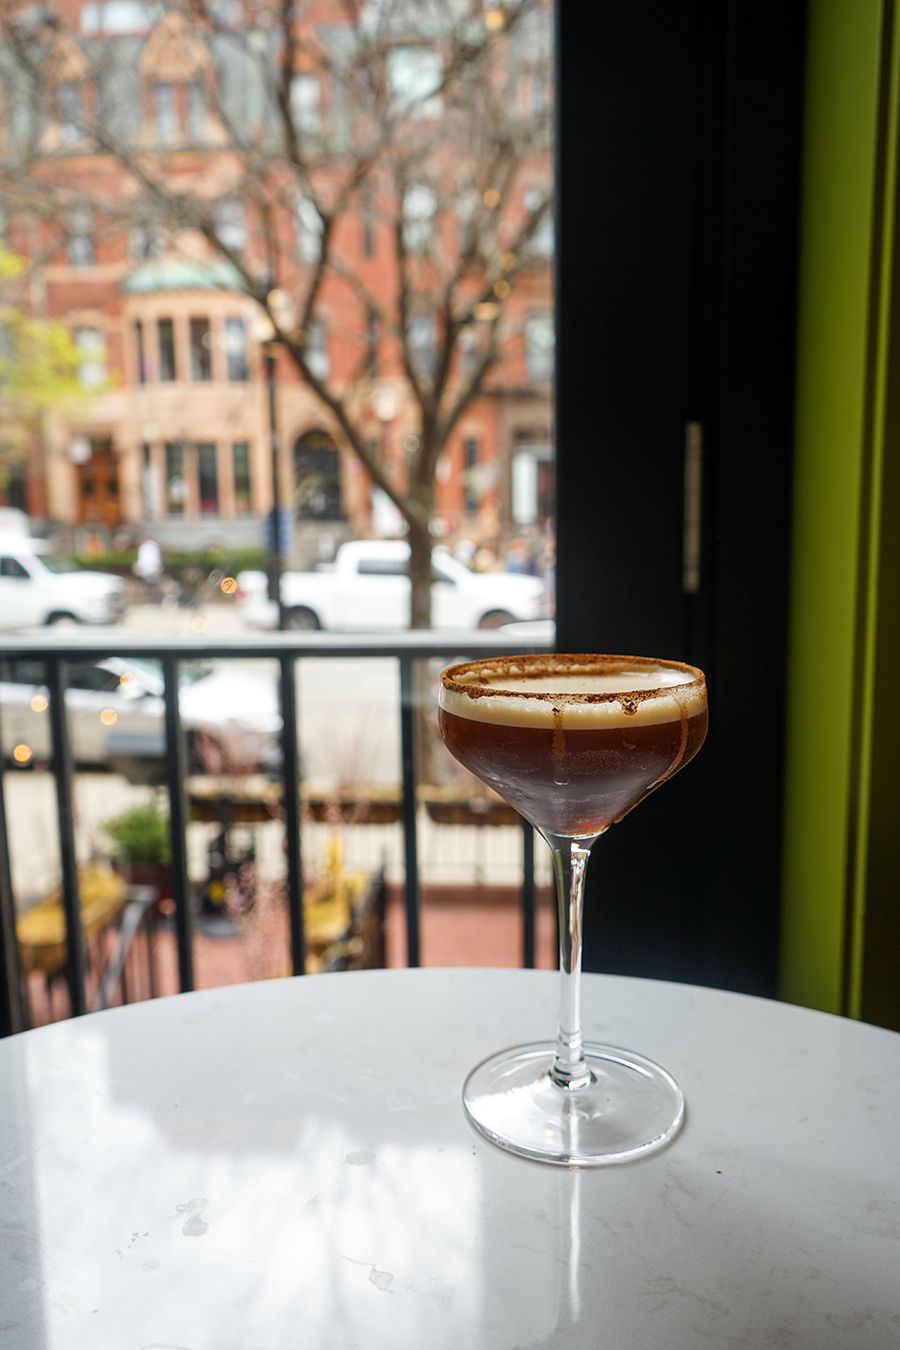 An espresso martini sits on a table in front of a large window looking out onto Boston's Newbury Street.